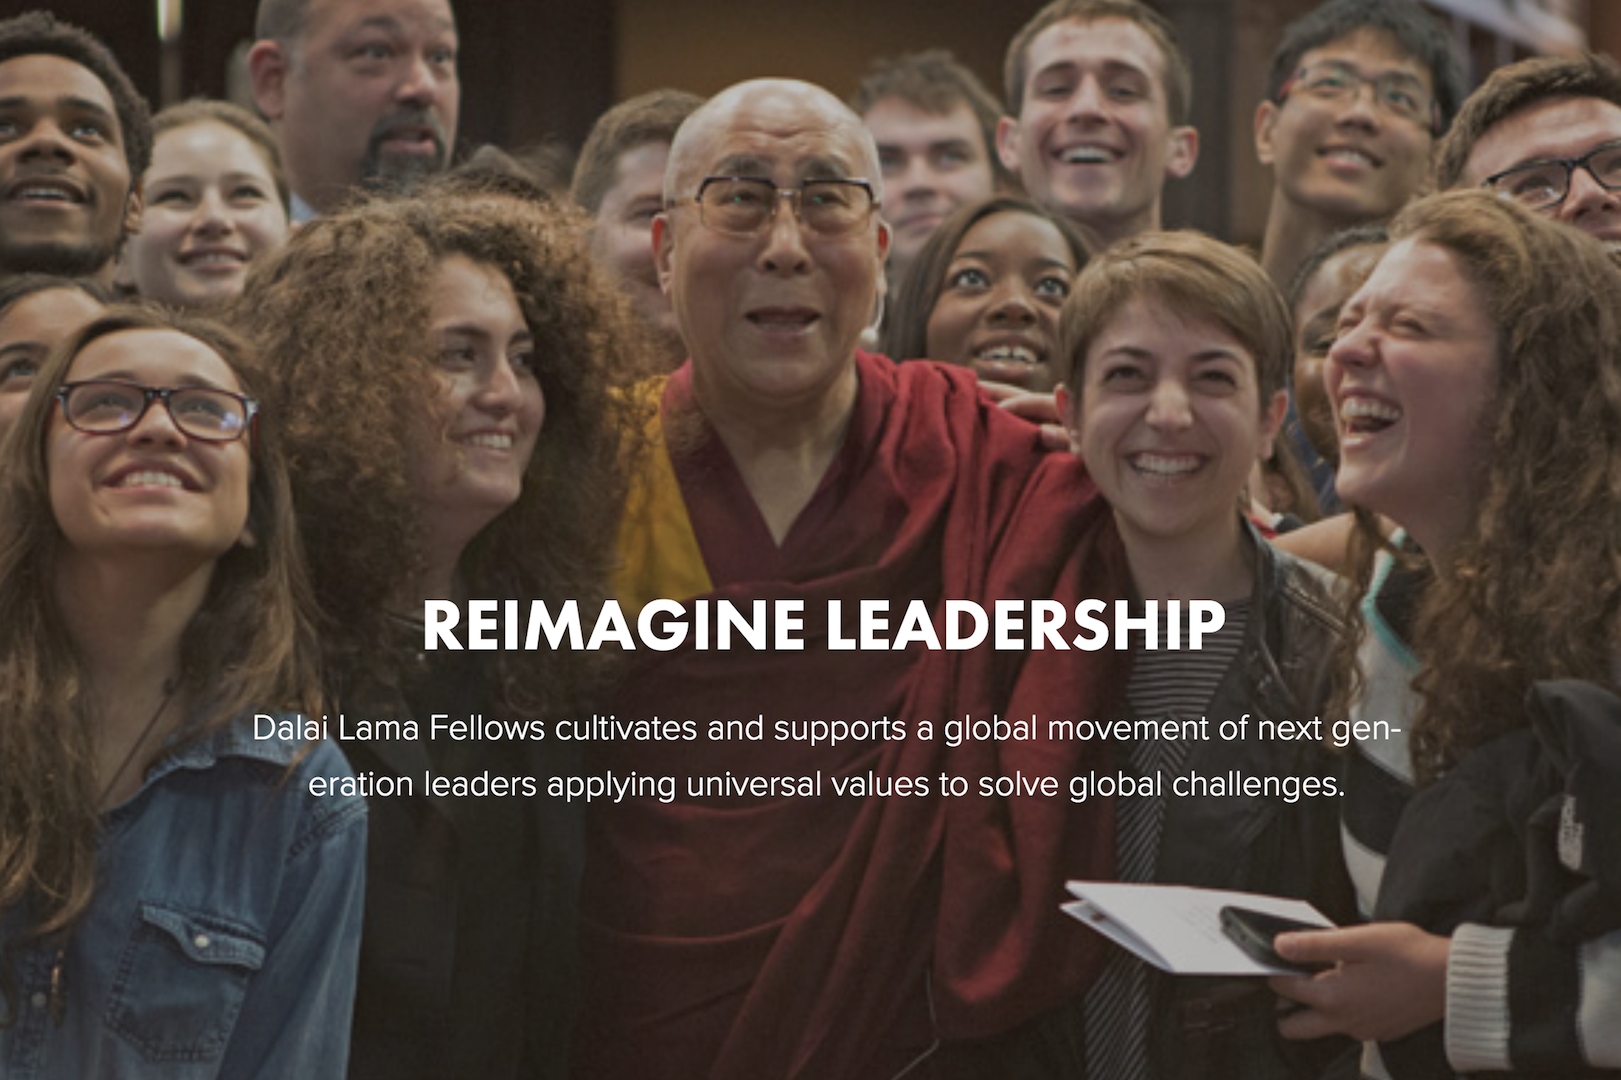 Image showing Dalai Lama surrounded by happy looking fellows; Reimagine Leadership: Dalai Lama Fellows cultivates and supports a global movement of next generation leaders applying universal values to solve global challenges